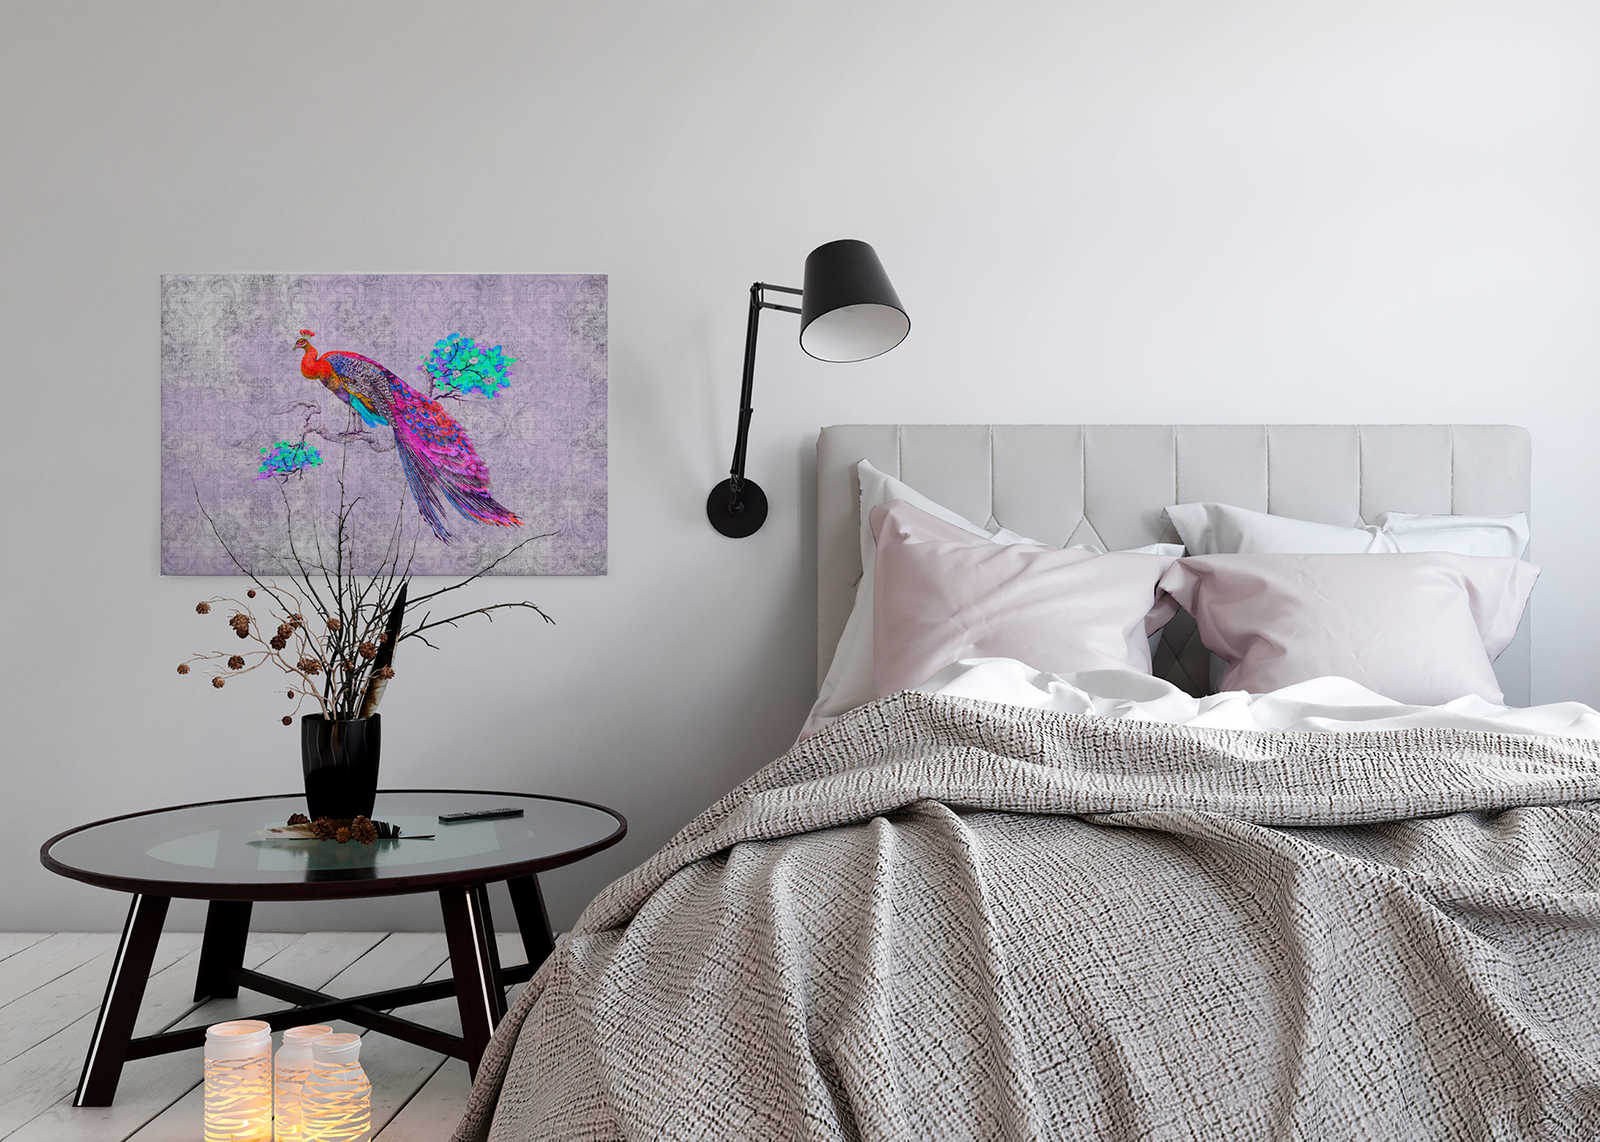             Peacock 3 - Canvas painting with colourful peacock - natural linen structure - 0.90 m x 0.60 m
        